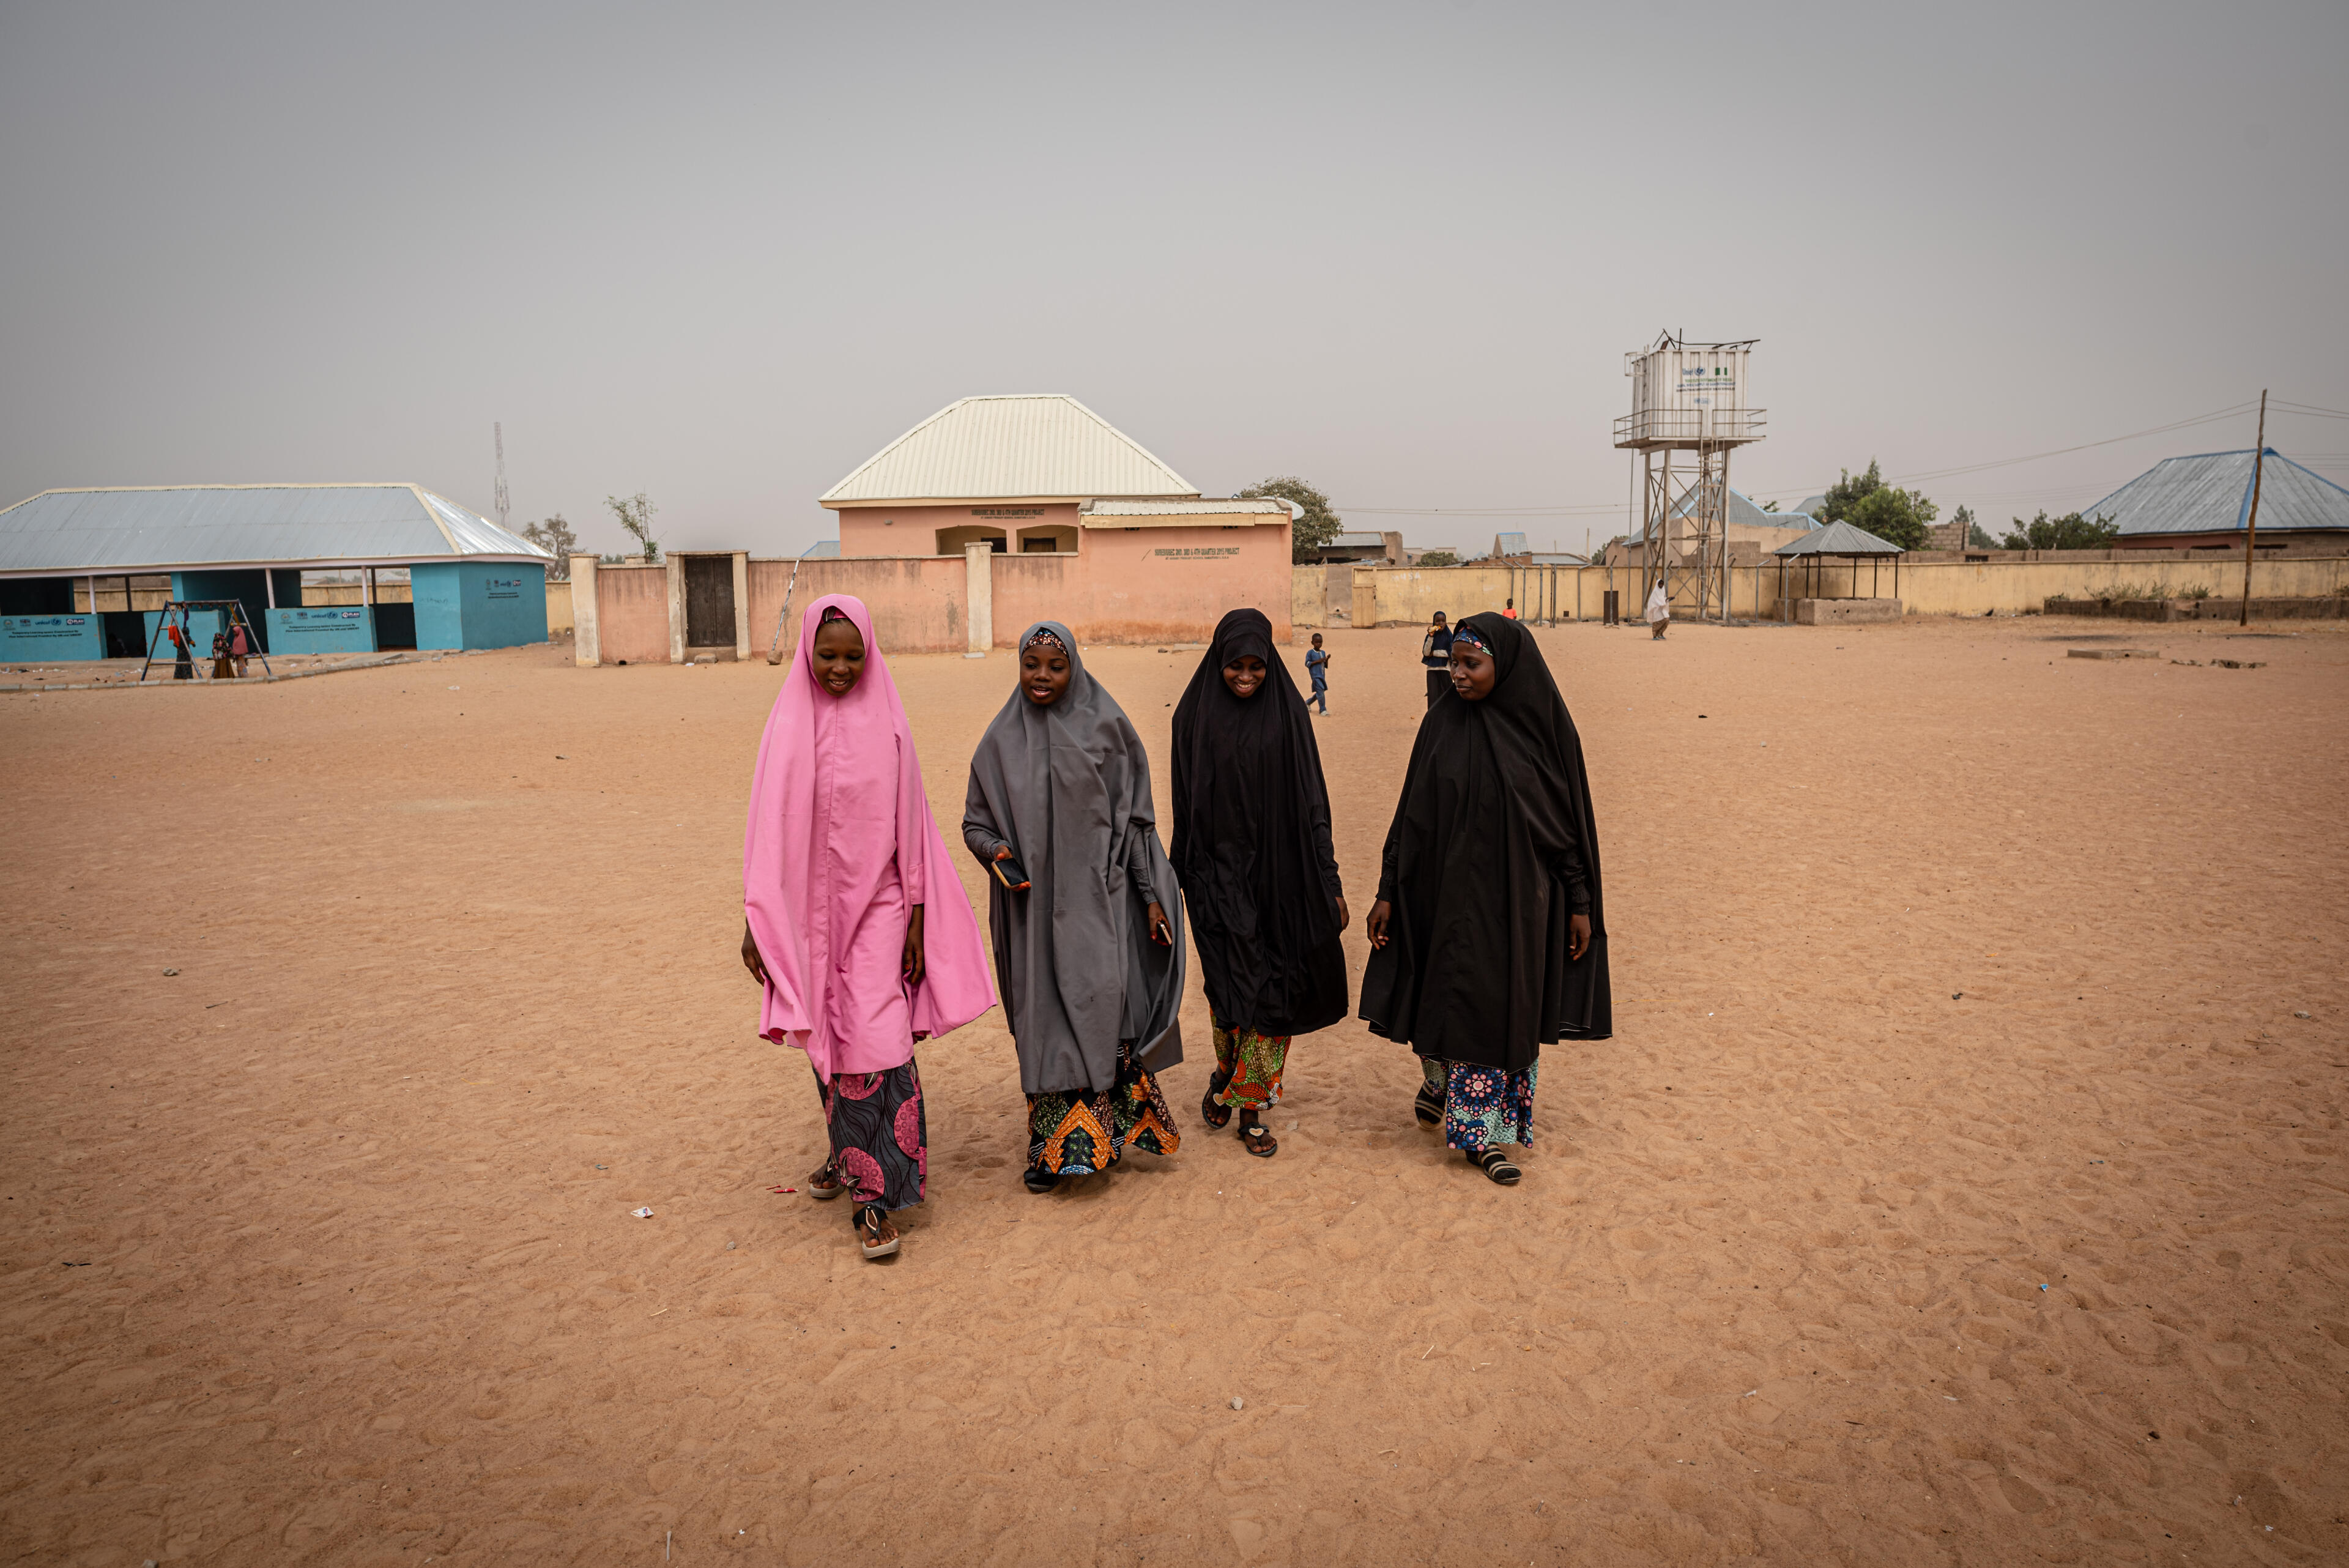 17-year-old Hauwa and four of her friends walk in a straight line across sandy soil near an IRC safe space in Niheria